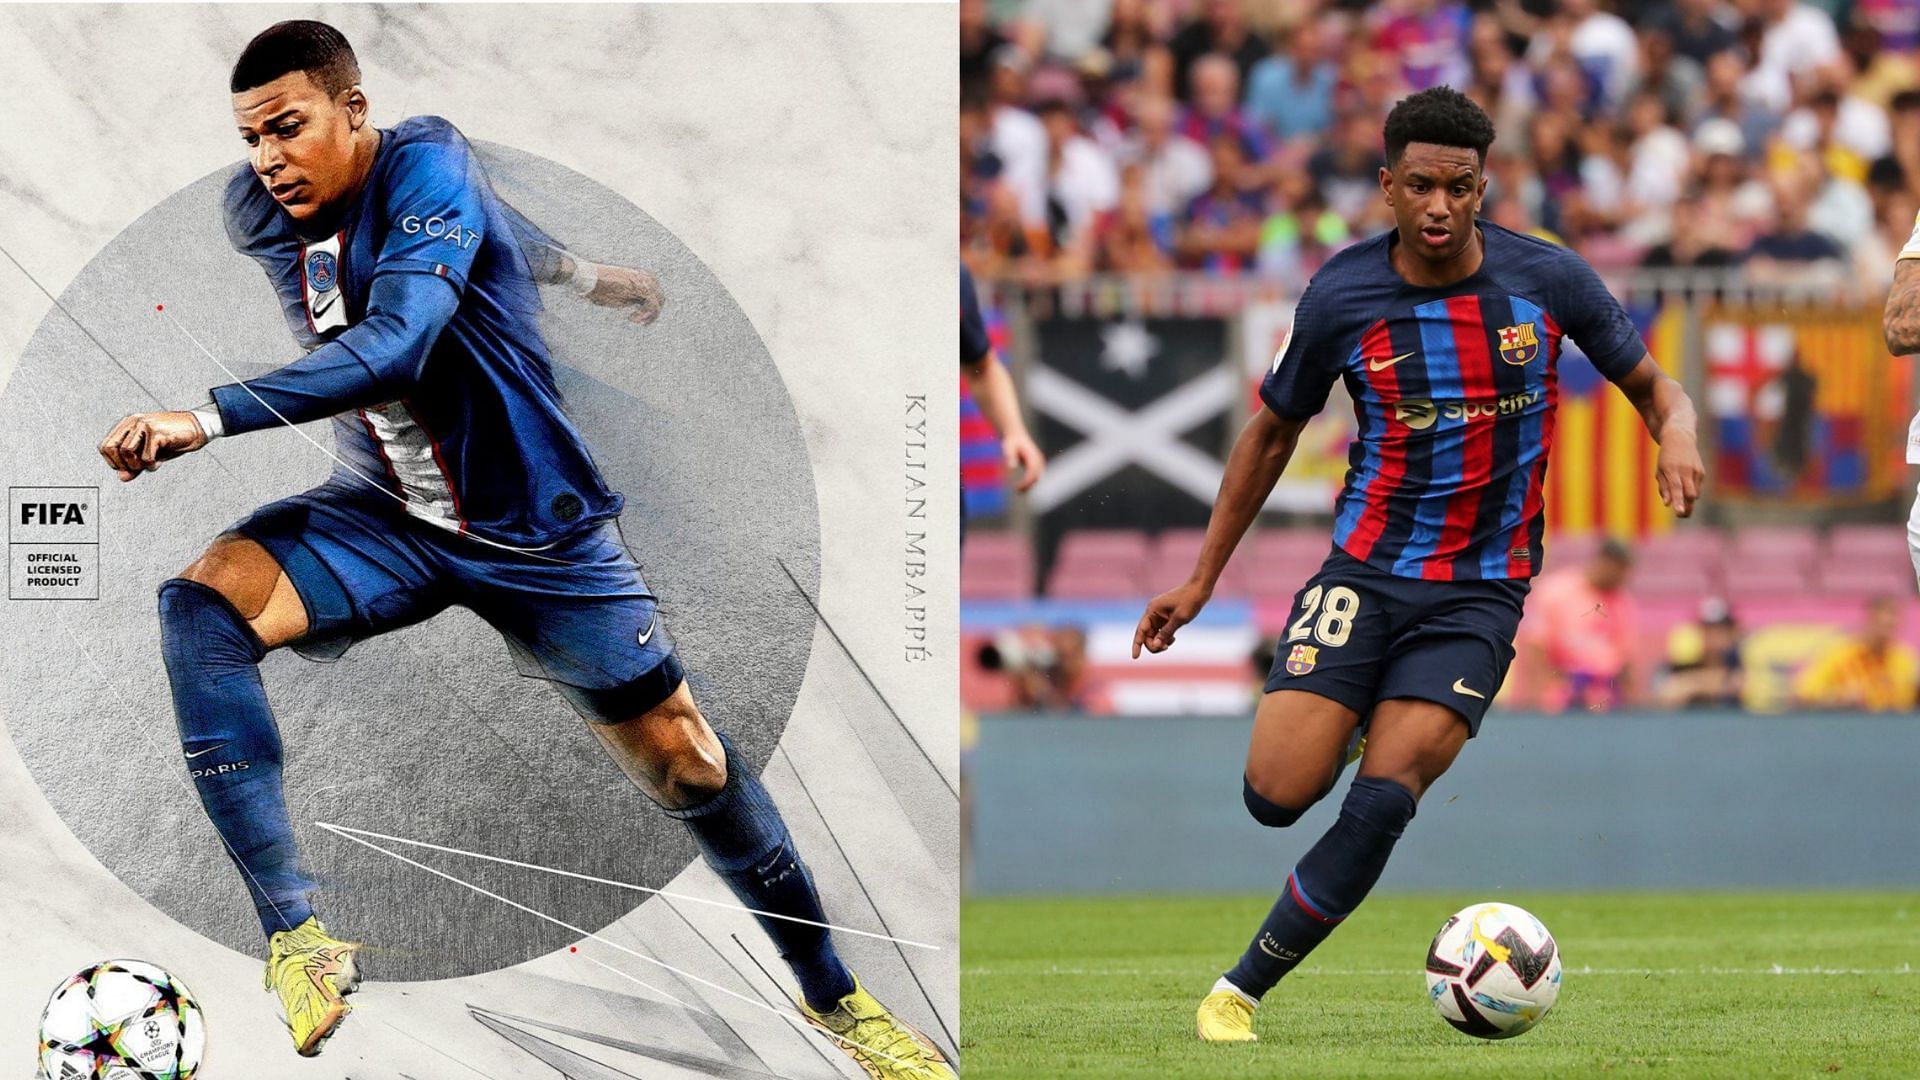 Balde is one of the brighter youngsters in the game (Images via EA Sports, Marca)